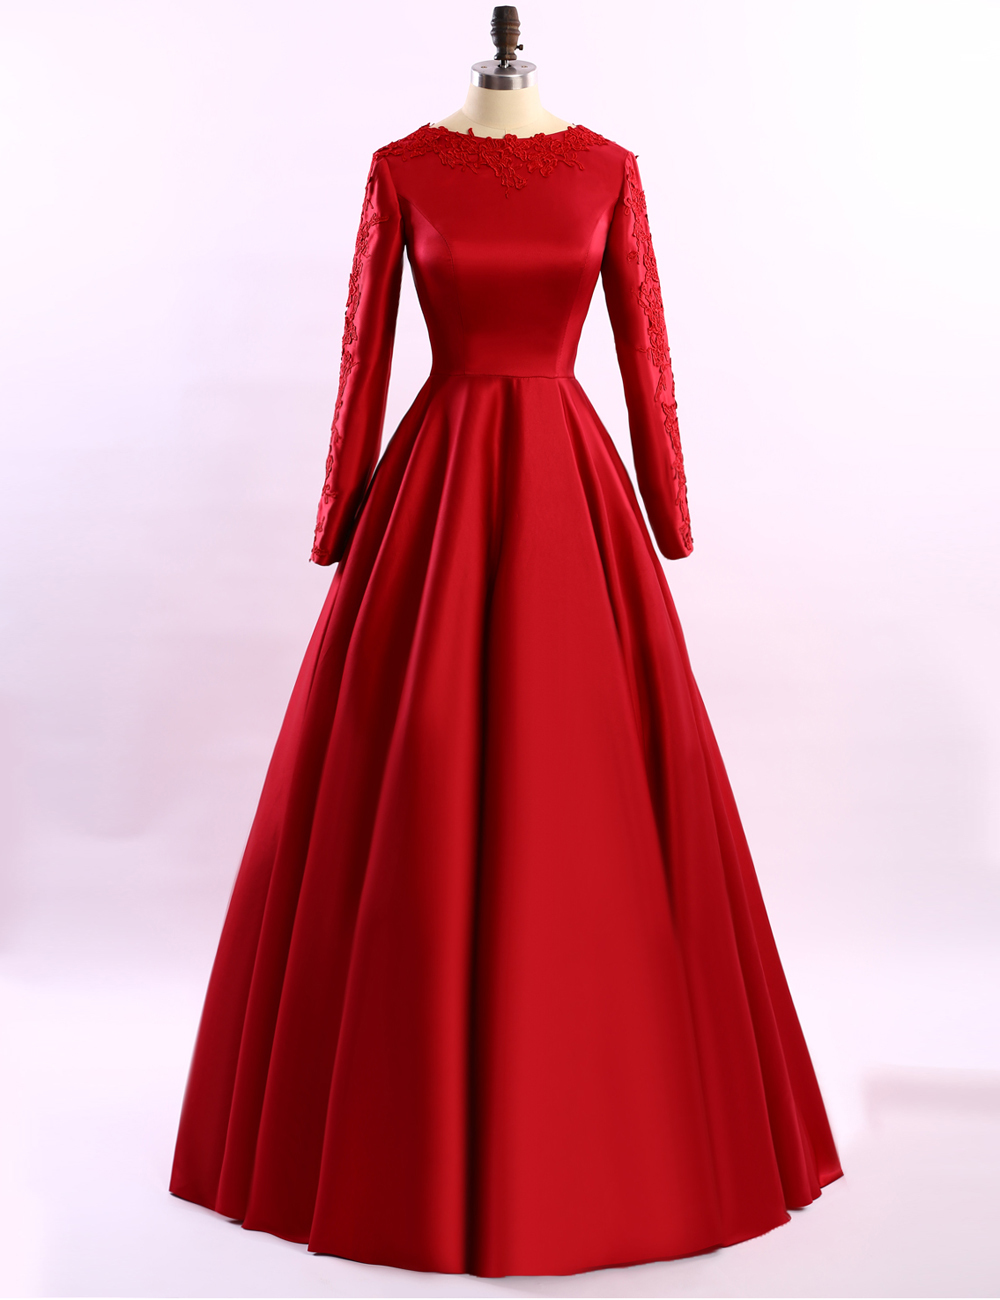 Simple Long Sleeve Red Evening Dresses 2017 Long Evening Dress With Sleeves Formal Dresses Special Occasion Dresses